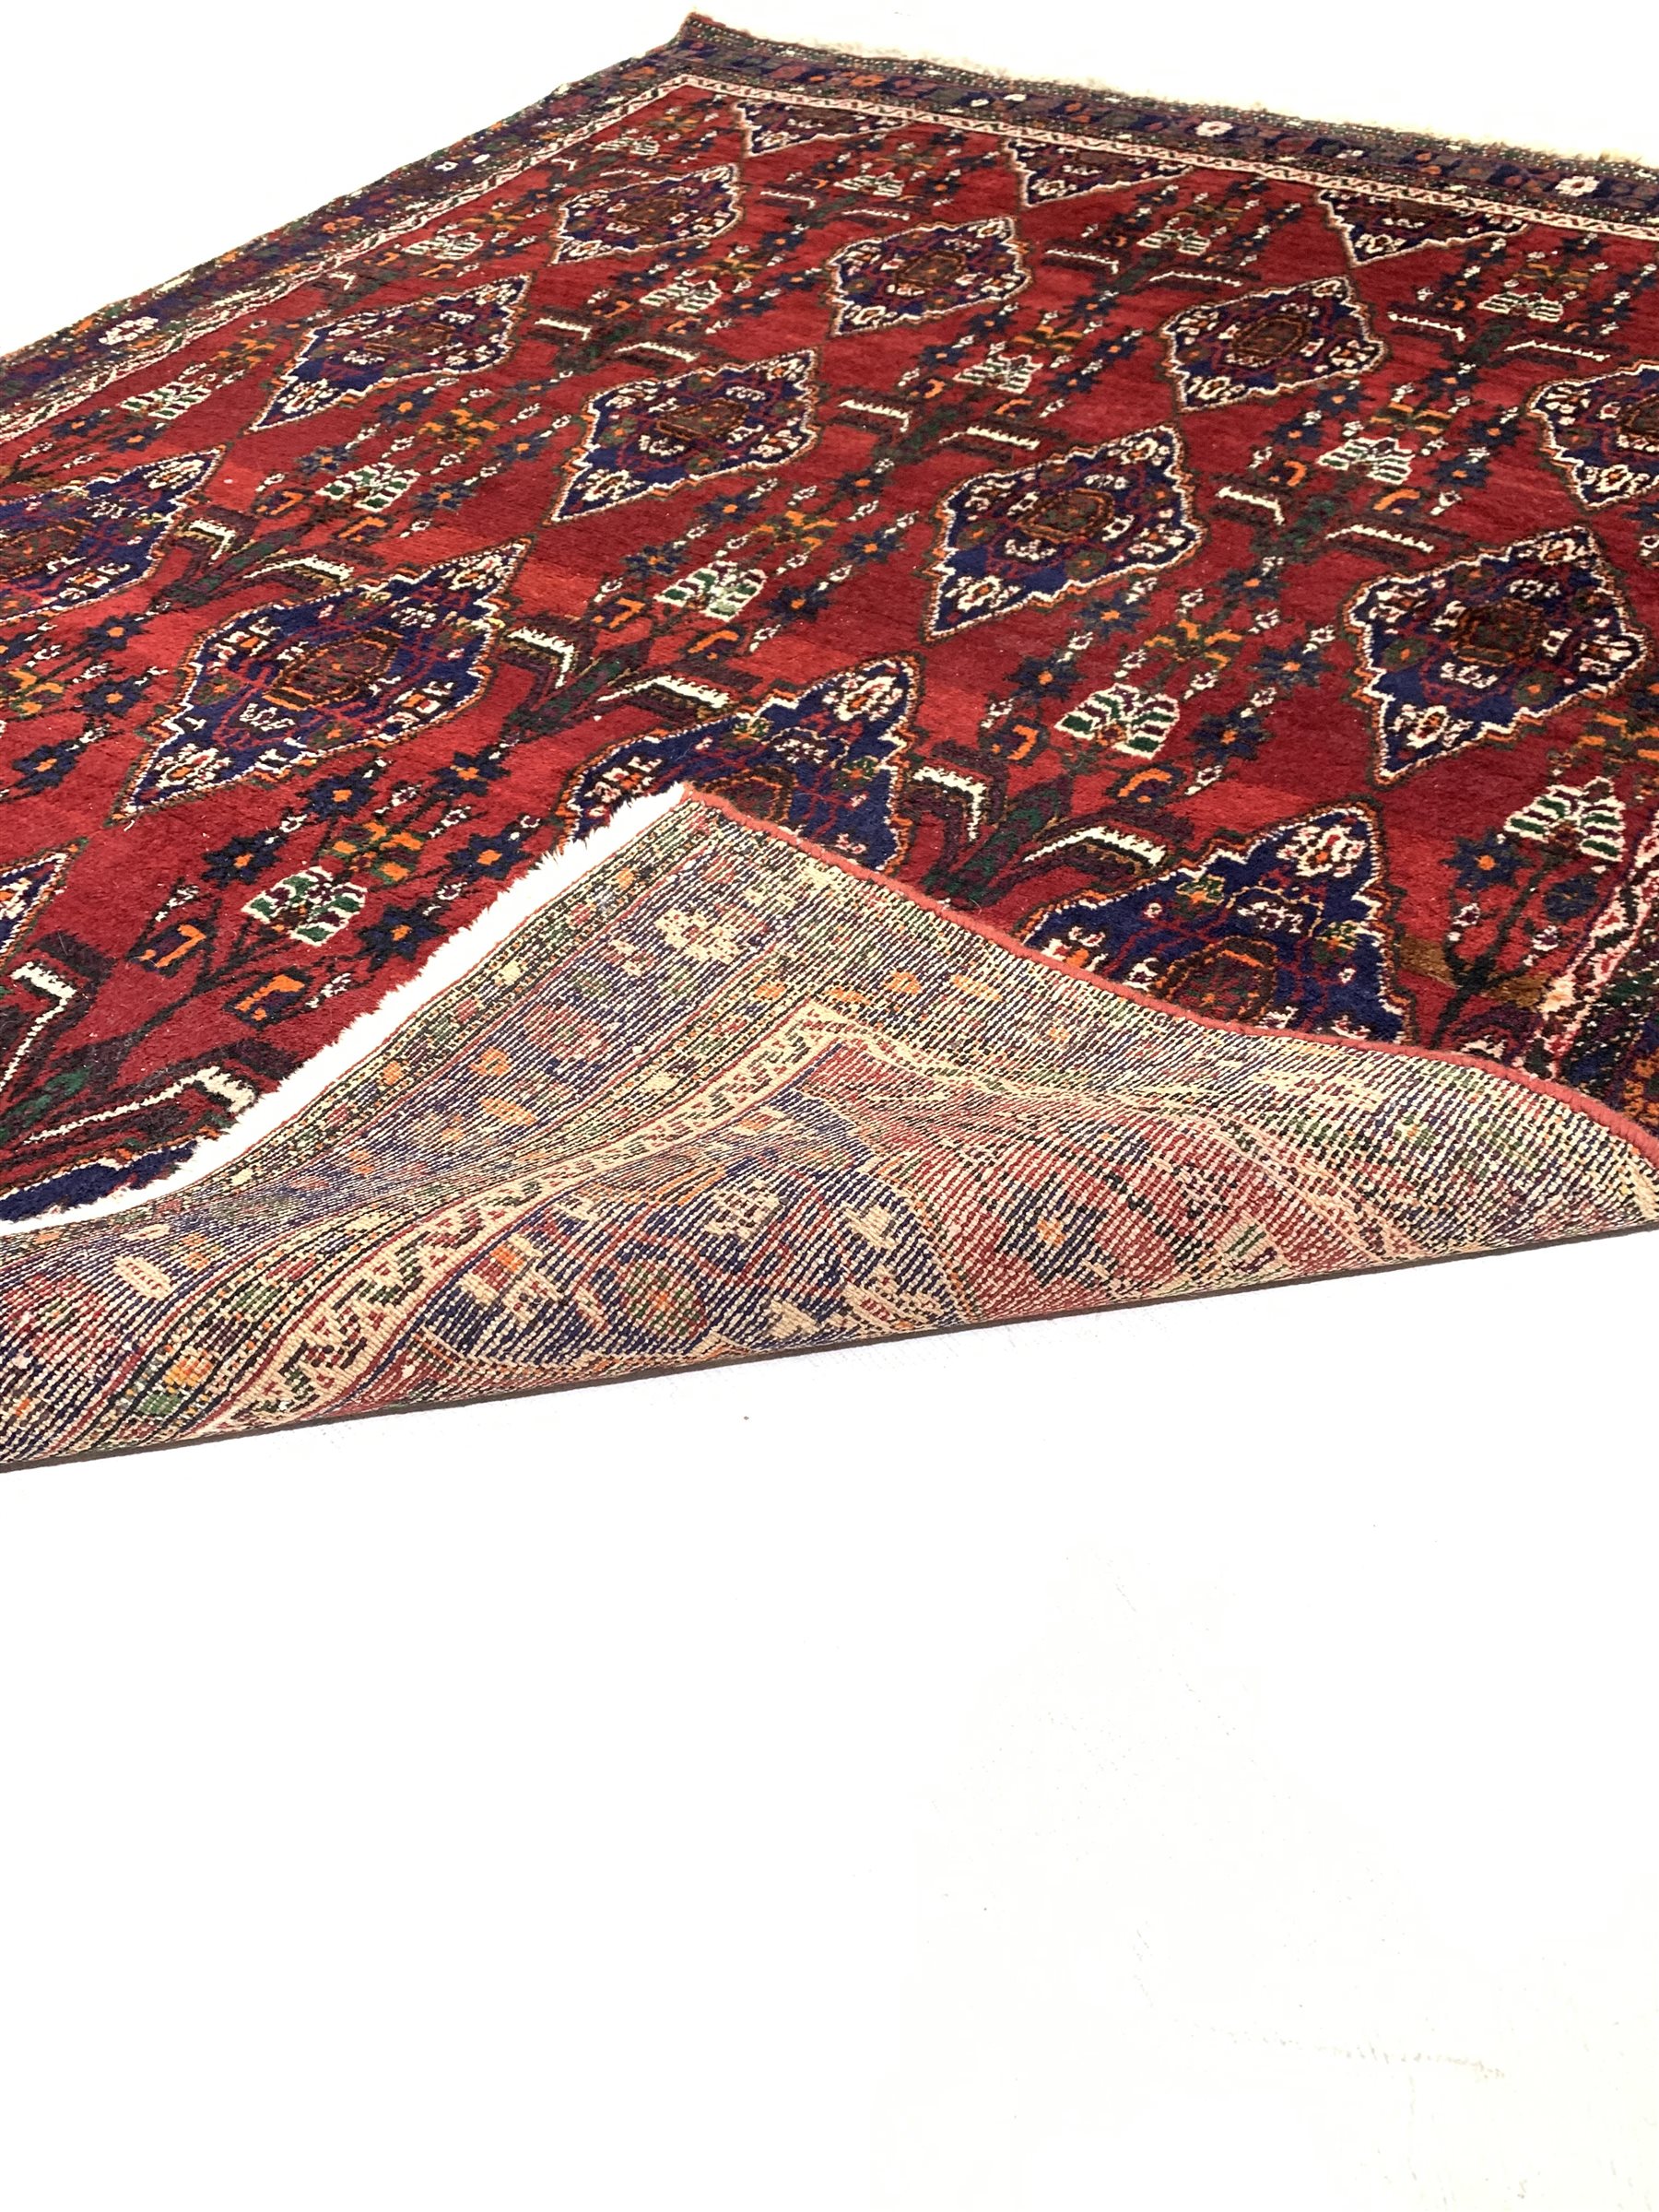 Iranian Neynz rug, red ground with multiple stylised lozenge decorated field - Image 3 of 3